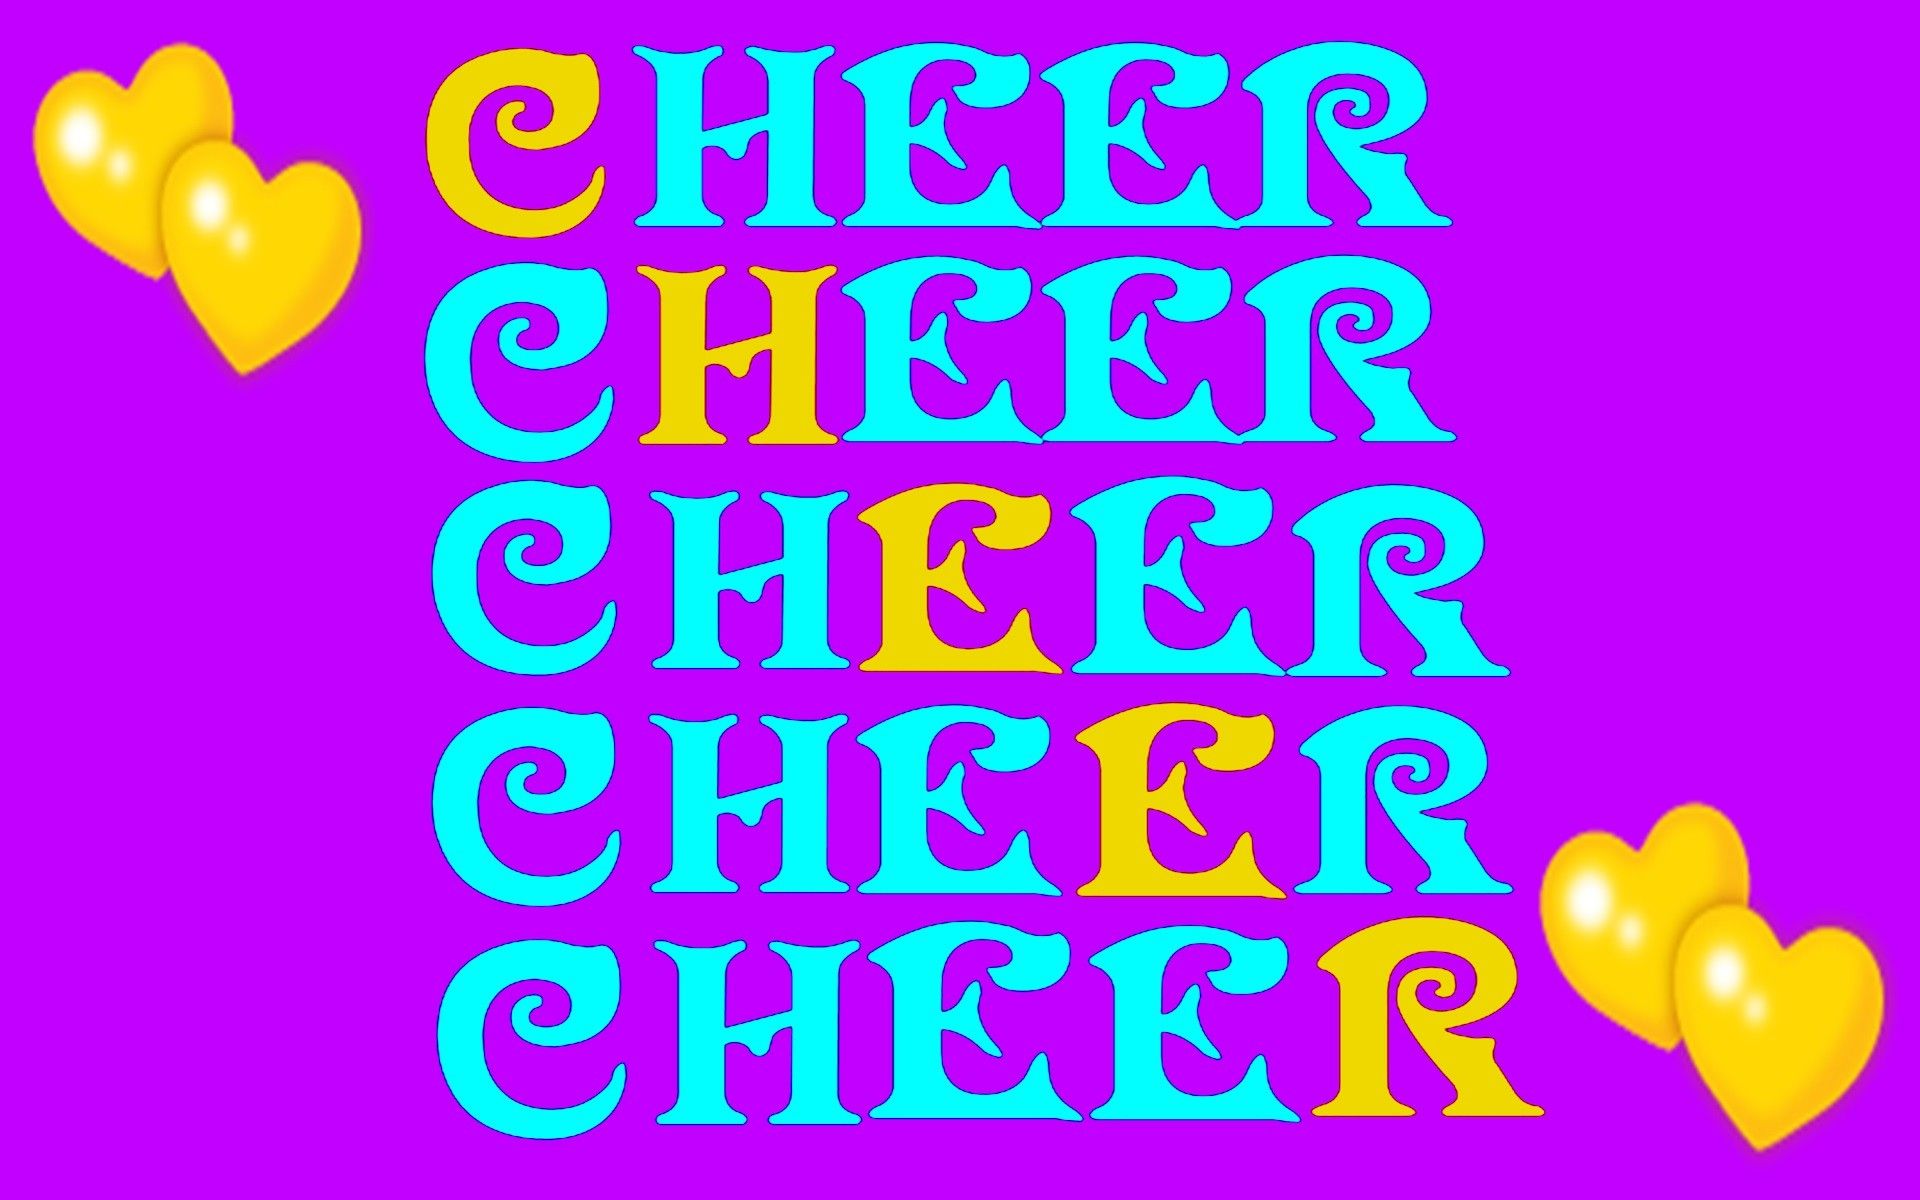 Cheerleading Quote Wallpapers on WallpaperDog